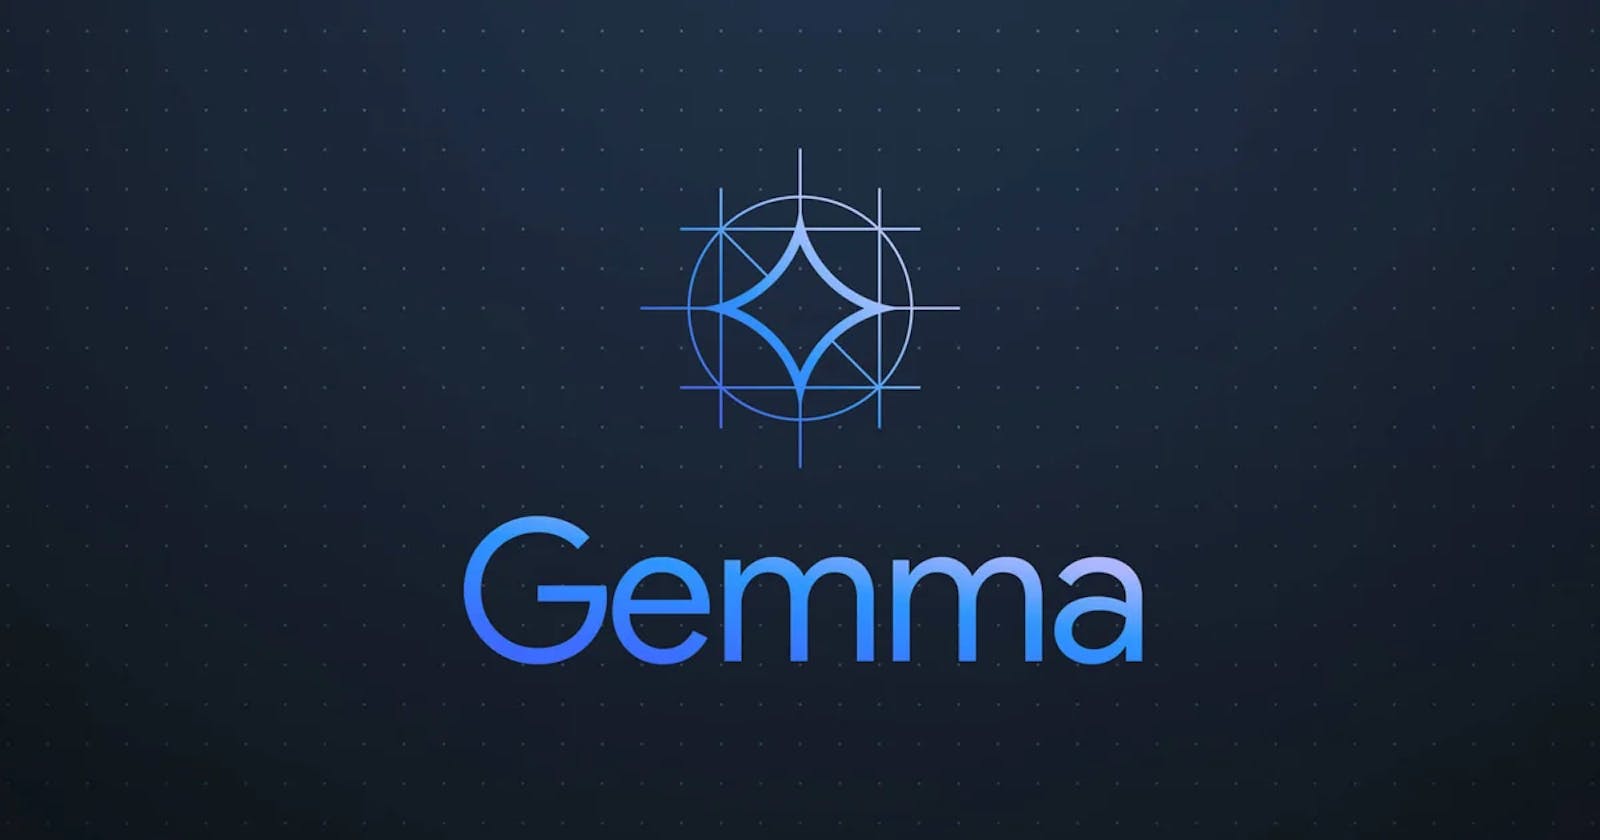 Meet Gemma: A New Open-Source Model for Developers and Researchers